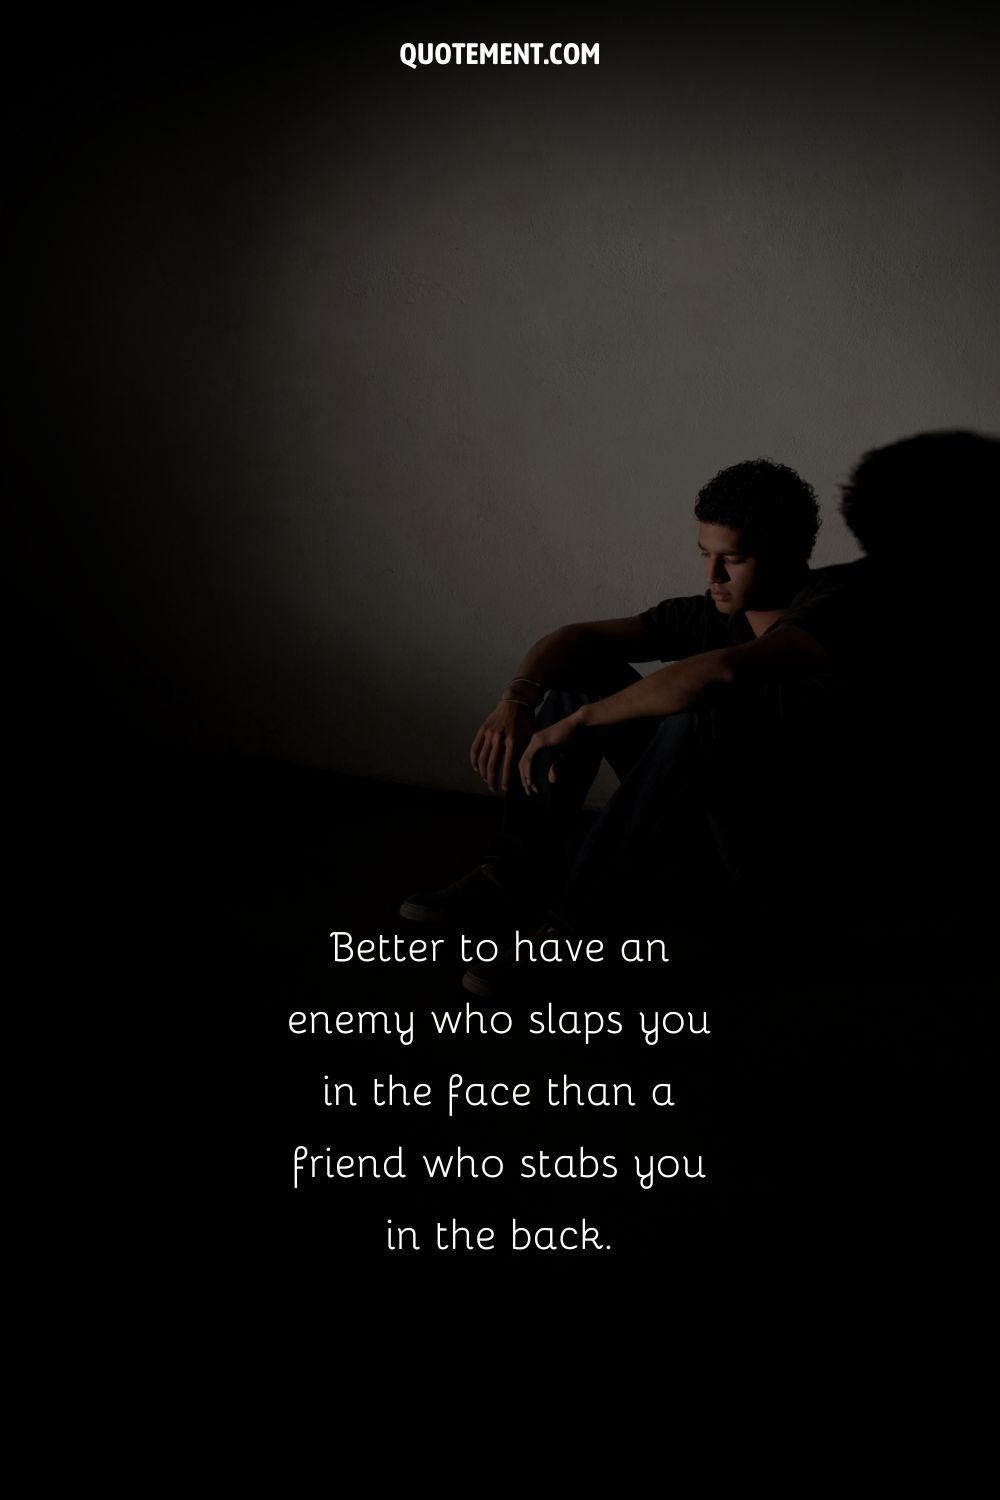 Better to have an enemy who slaps you in the face than a friend who stabs you in the back